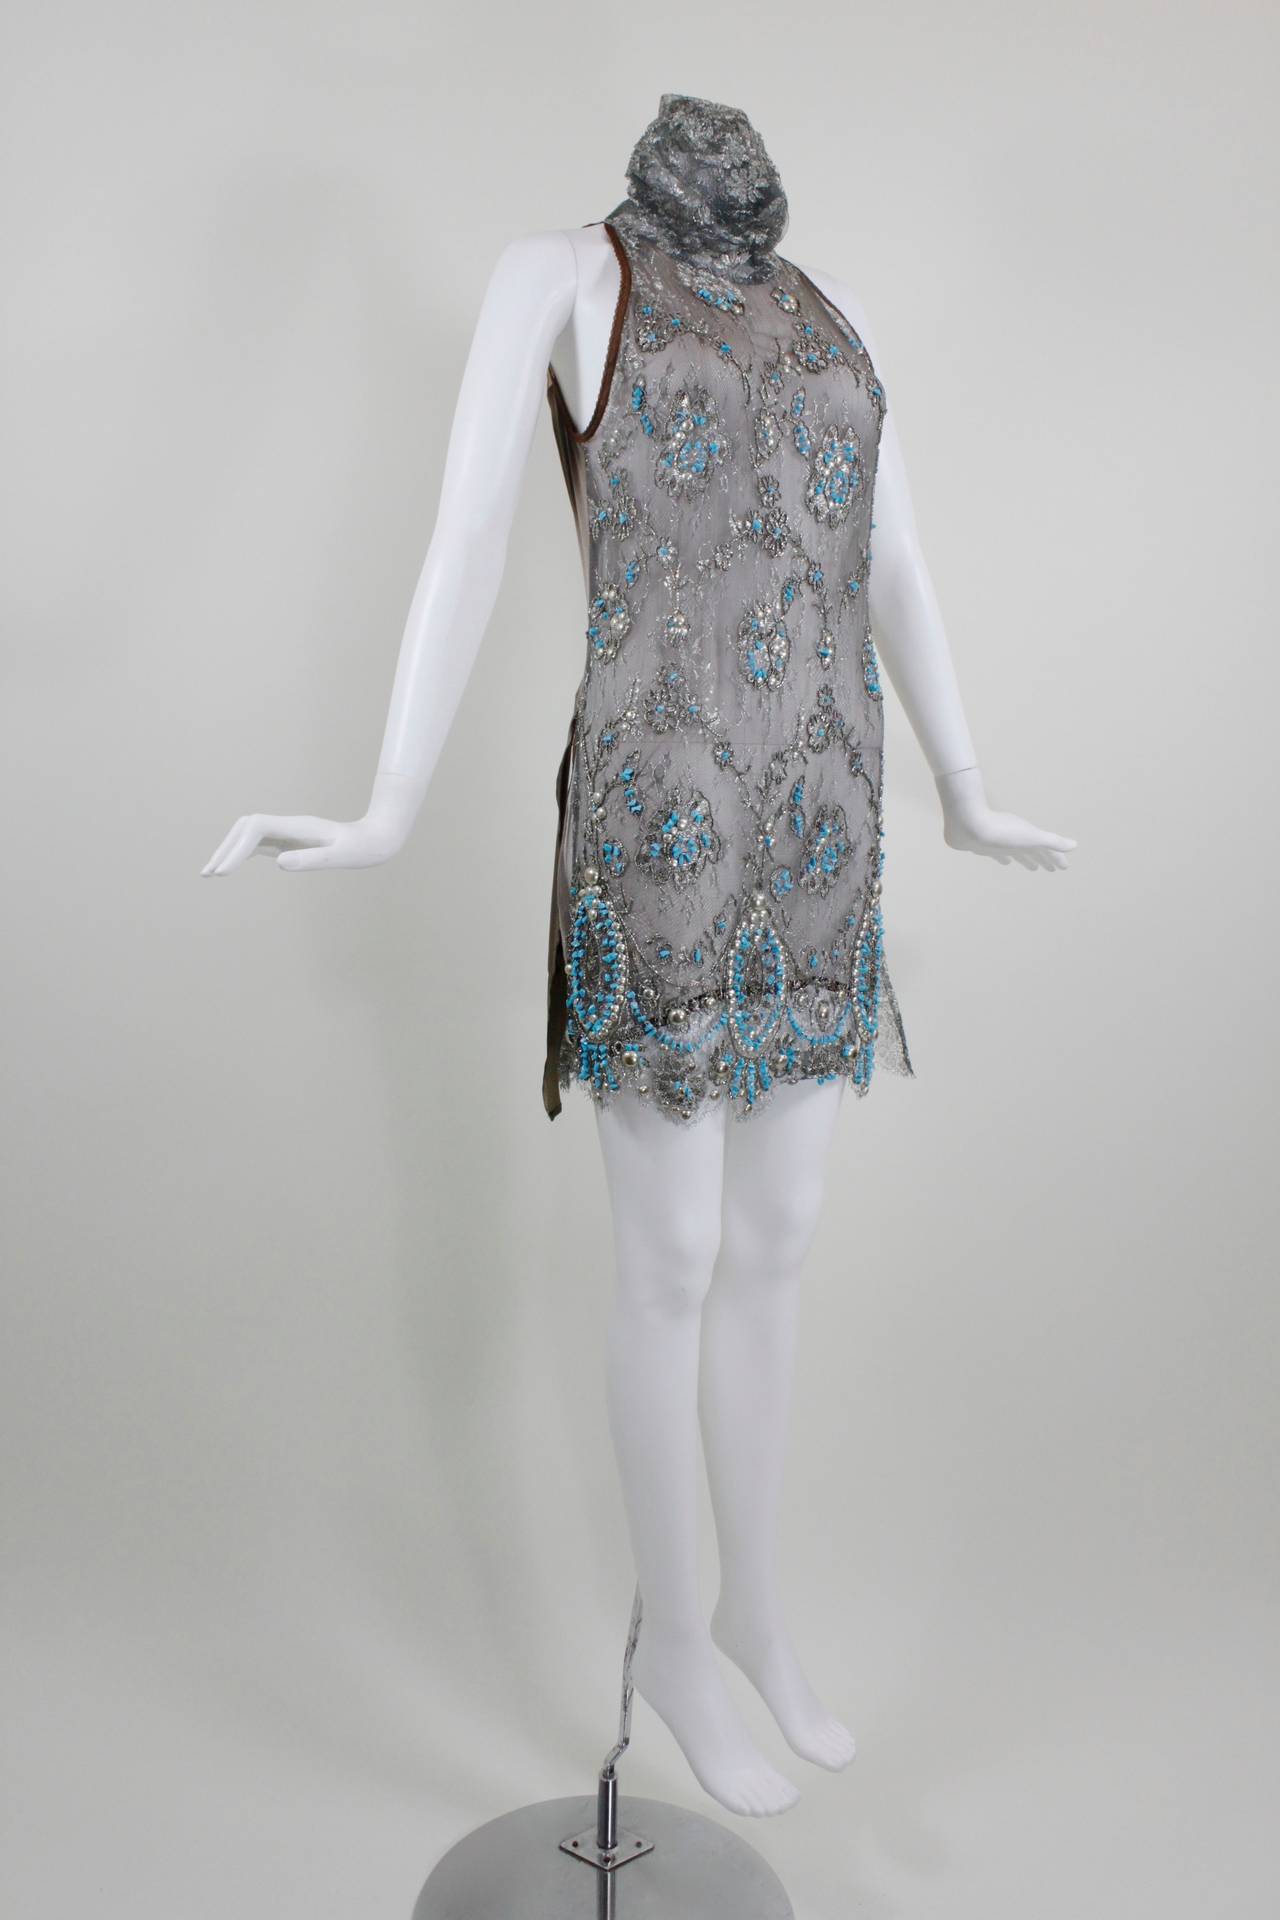 Gianfranco Ferre Metallic Taupe Lace and Turquoise Beaded Tabard In Excellent Condition For Sale In Los Angeles, CA